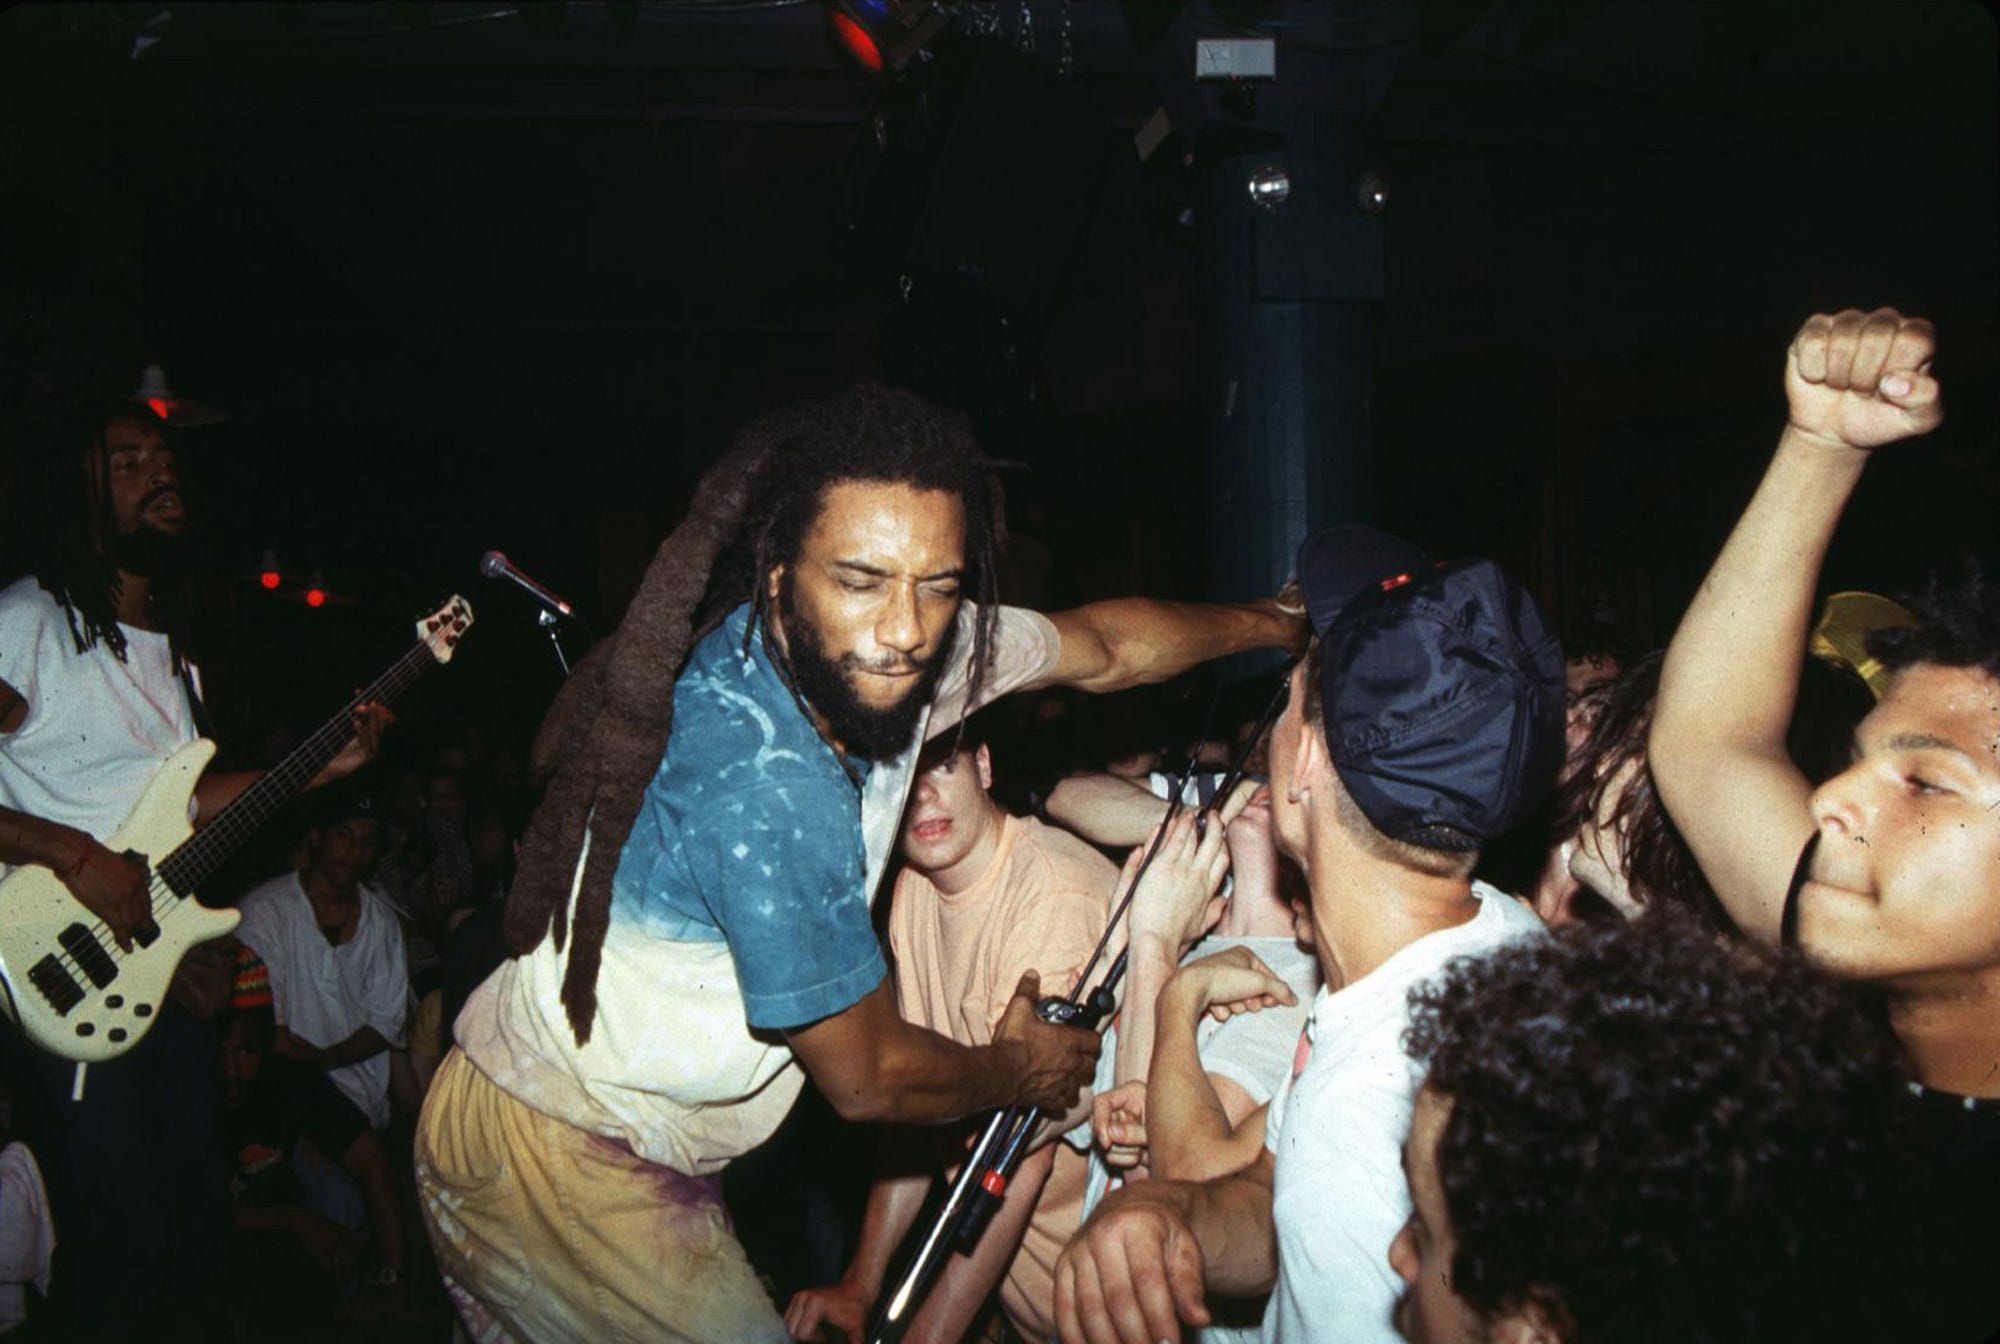 Unity and Resistance: The Message of Bad Brains, by Aaron Gilbreath